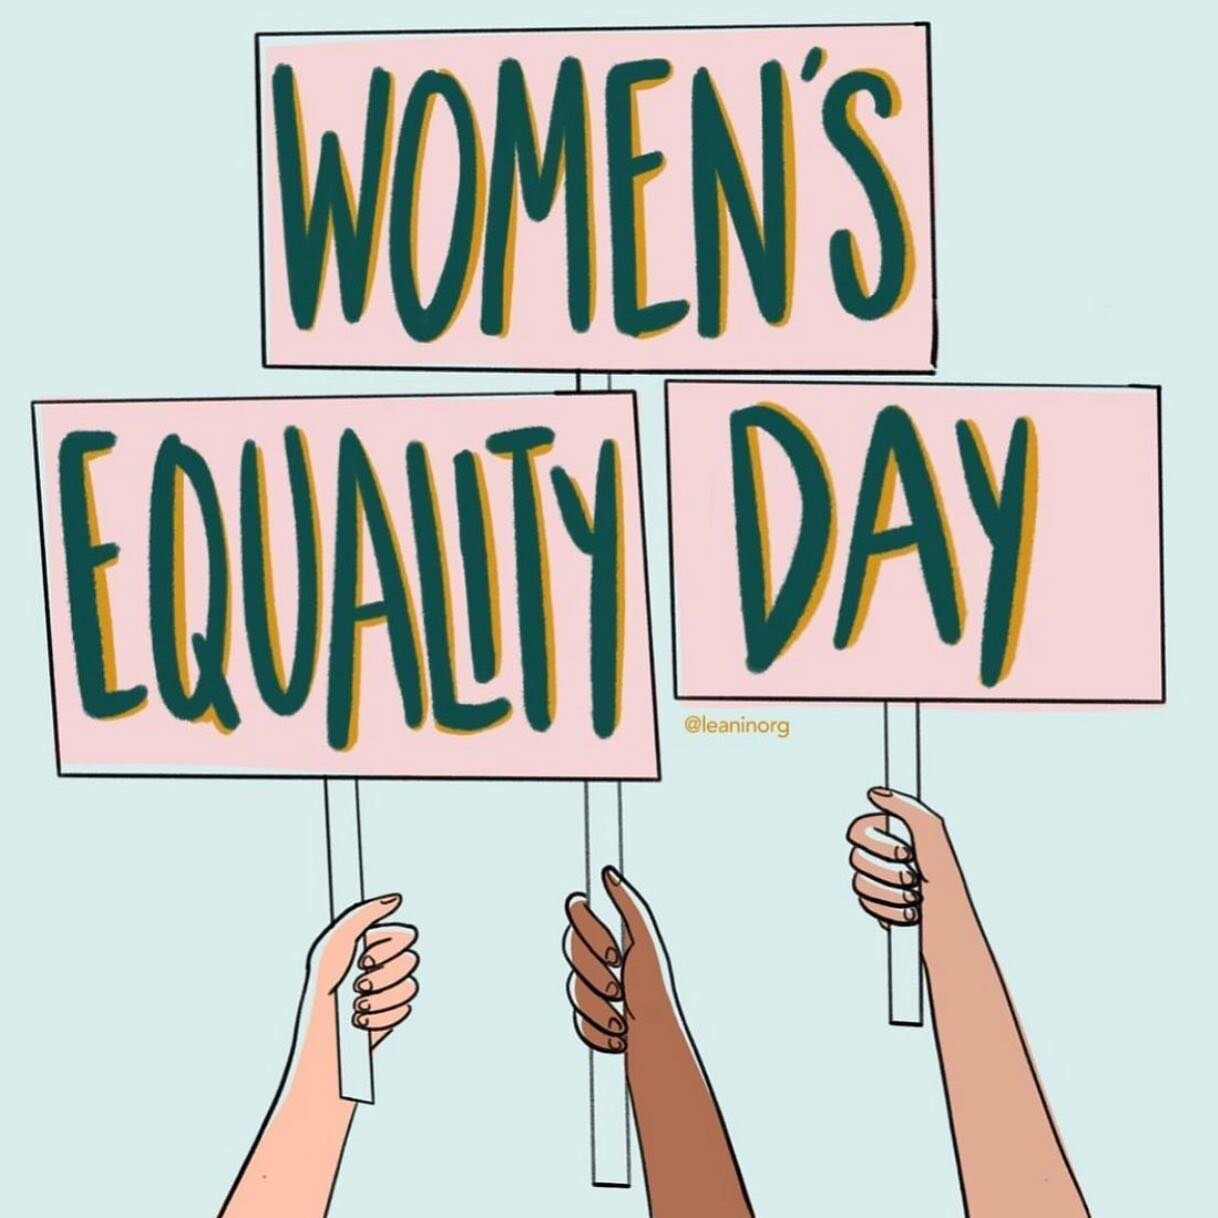 Happy Women&rsquo;s Equality Day! This year marks the 100th year of the 19th amendment which granted *white* women the right to vote. The fight for justice and equality for *all* still continues and is especially important during this election year. 